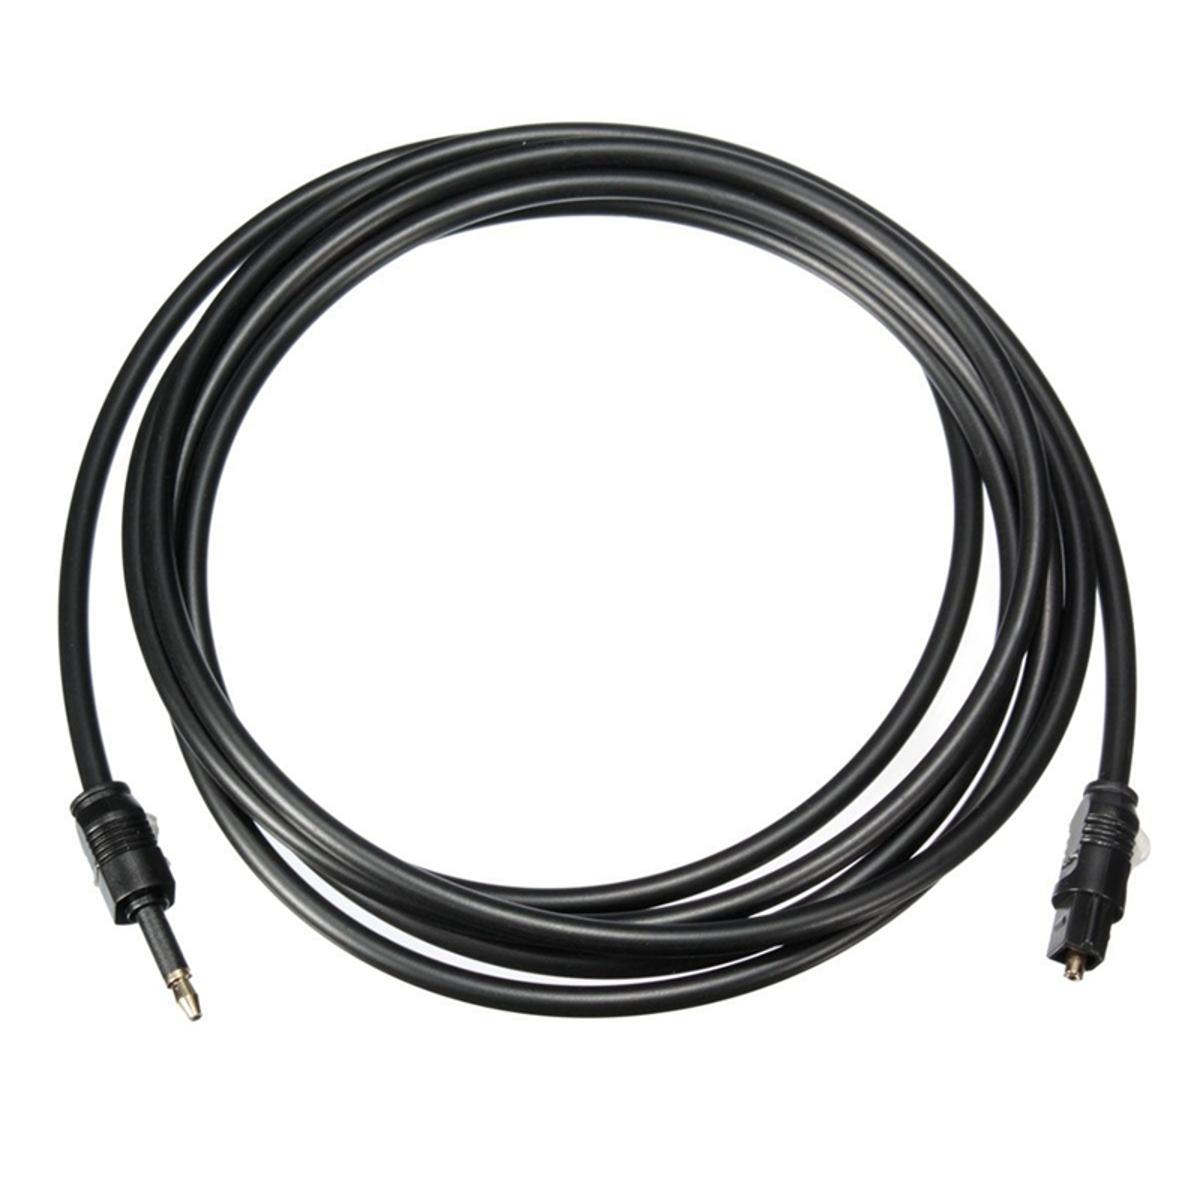 How Long Can An Optical Audio Cable Be